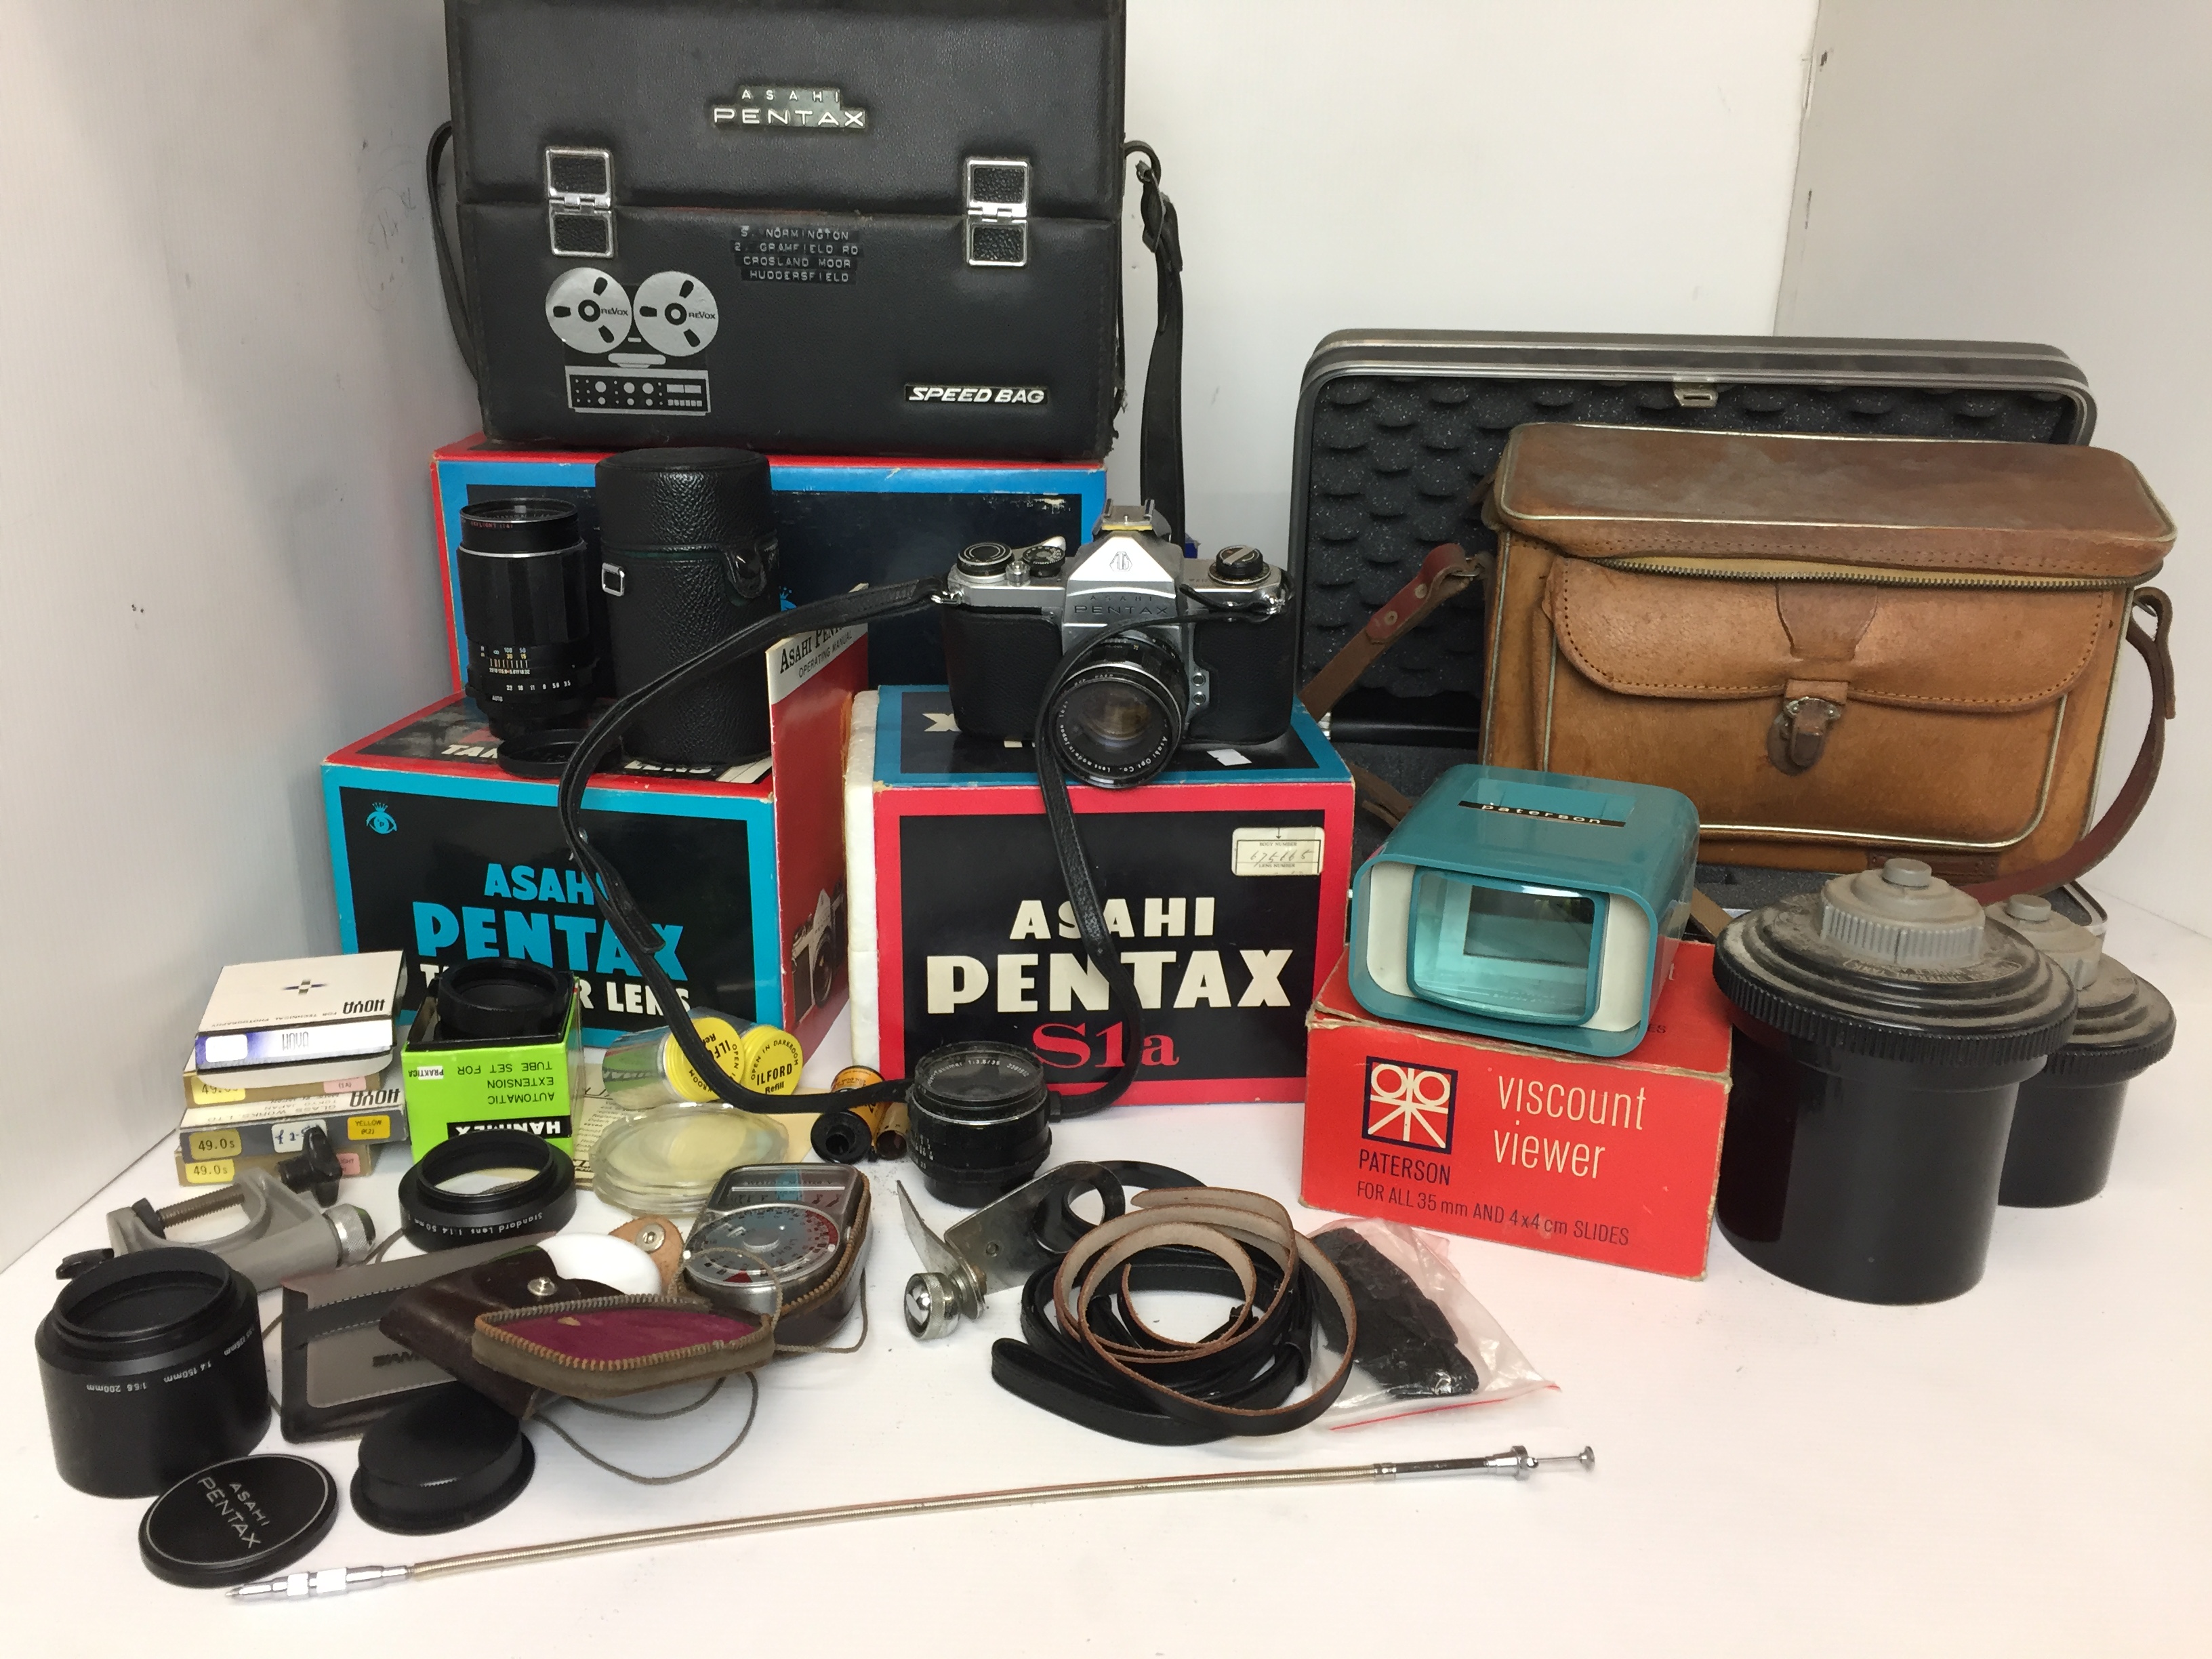 Twenty pieces of photographic equipment including Pentax S1a camera fitted with Asahi 1:2/5 5 lens